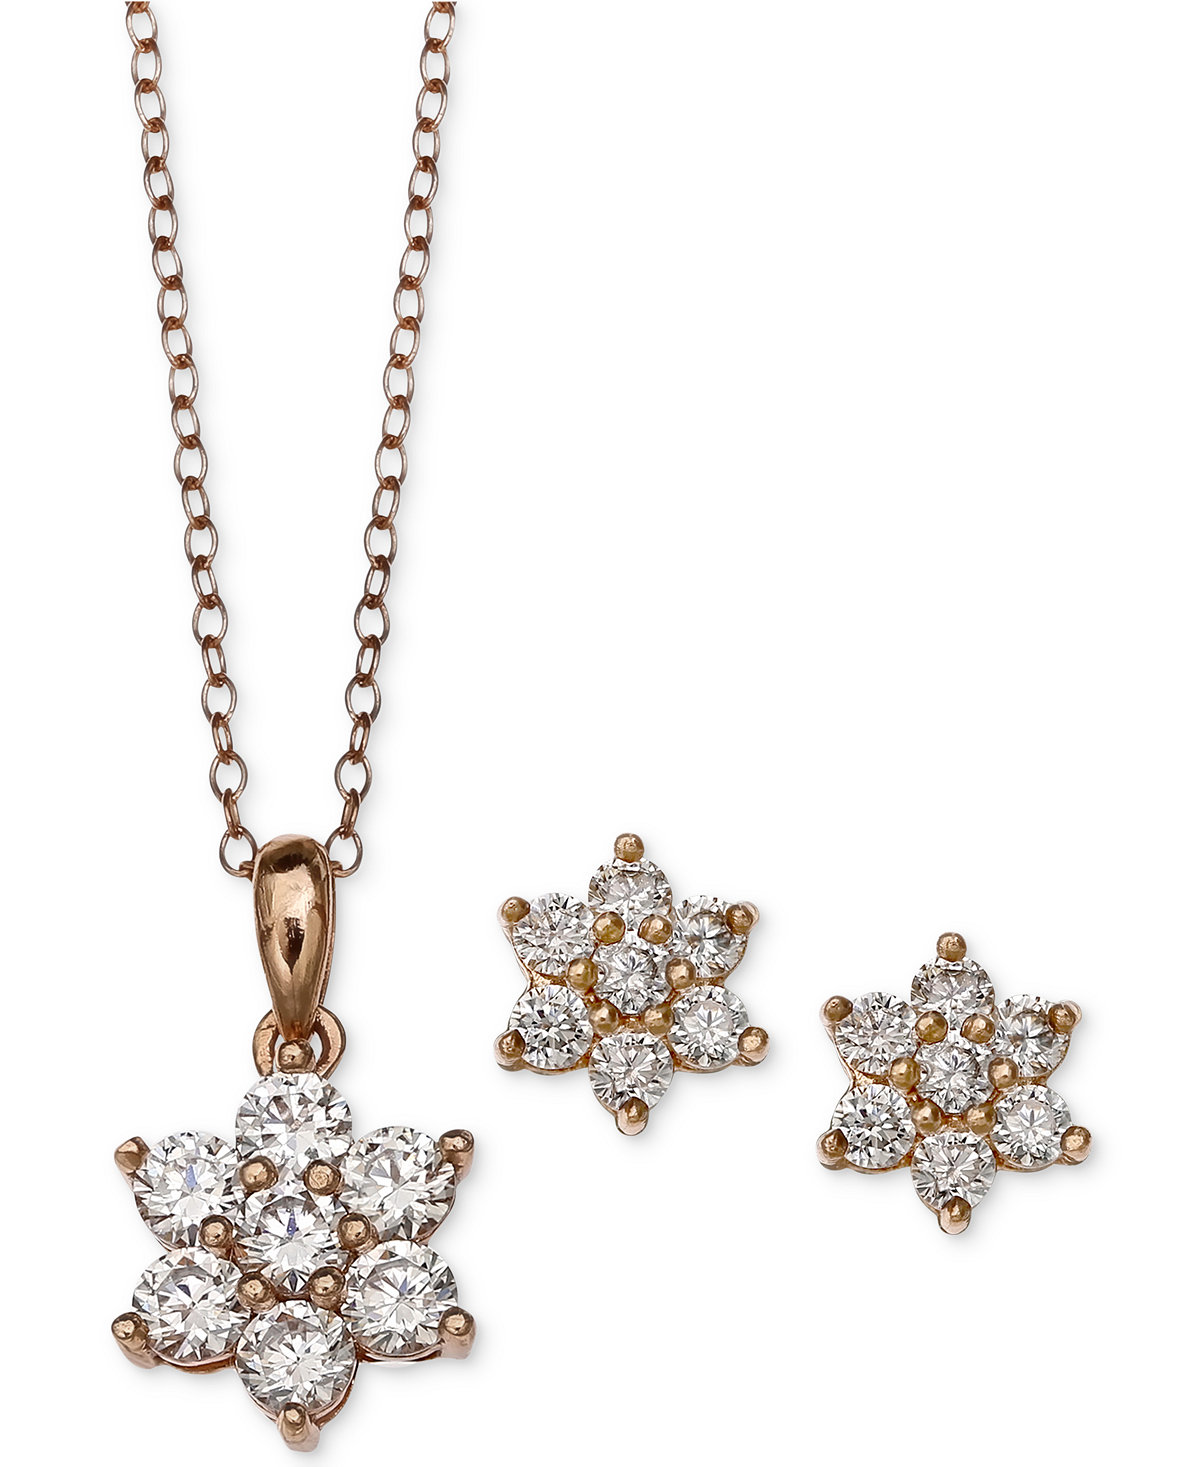 LIMITED TIME ONLY! MACYS JEWELRY CLEARANCE CLEAR OUT SALE PRICES AS LOW AS $12.06! dealsaving